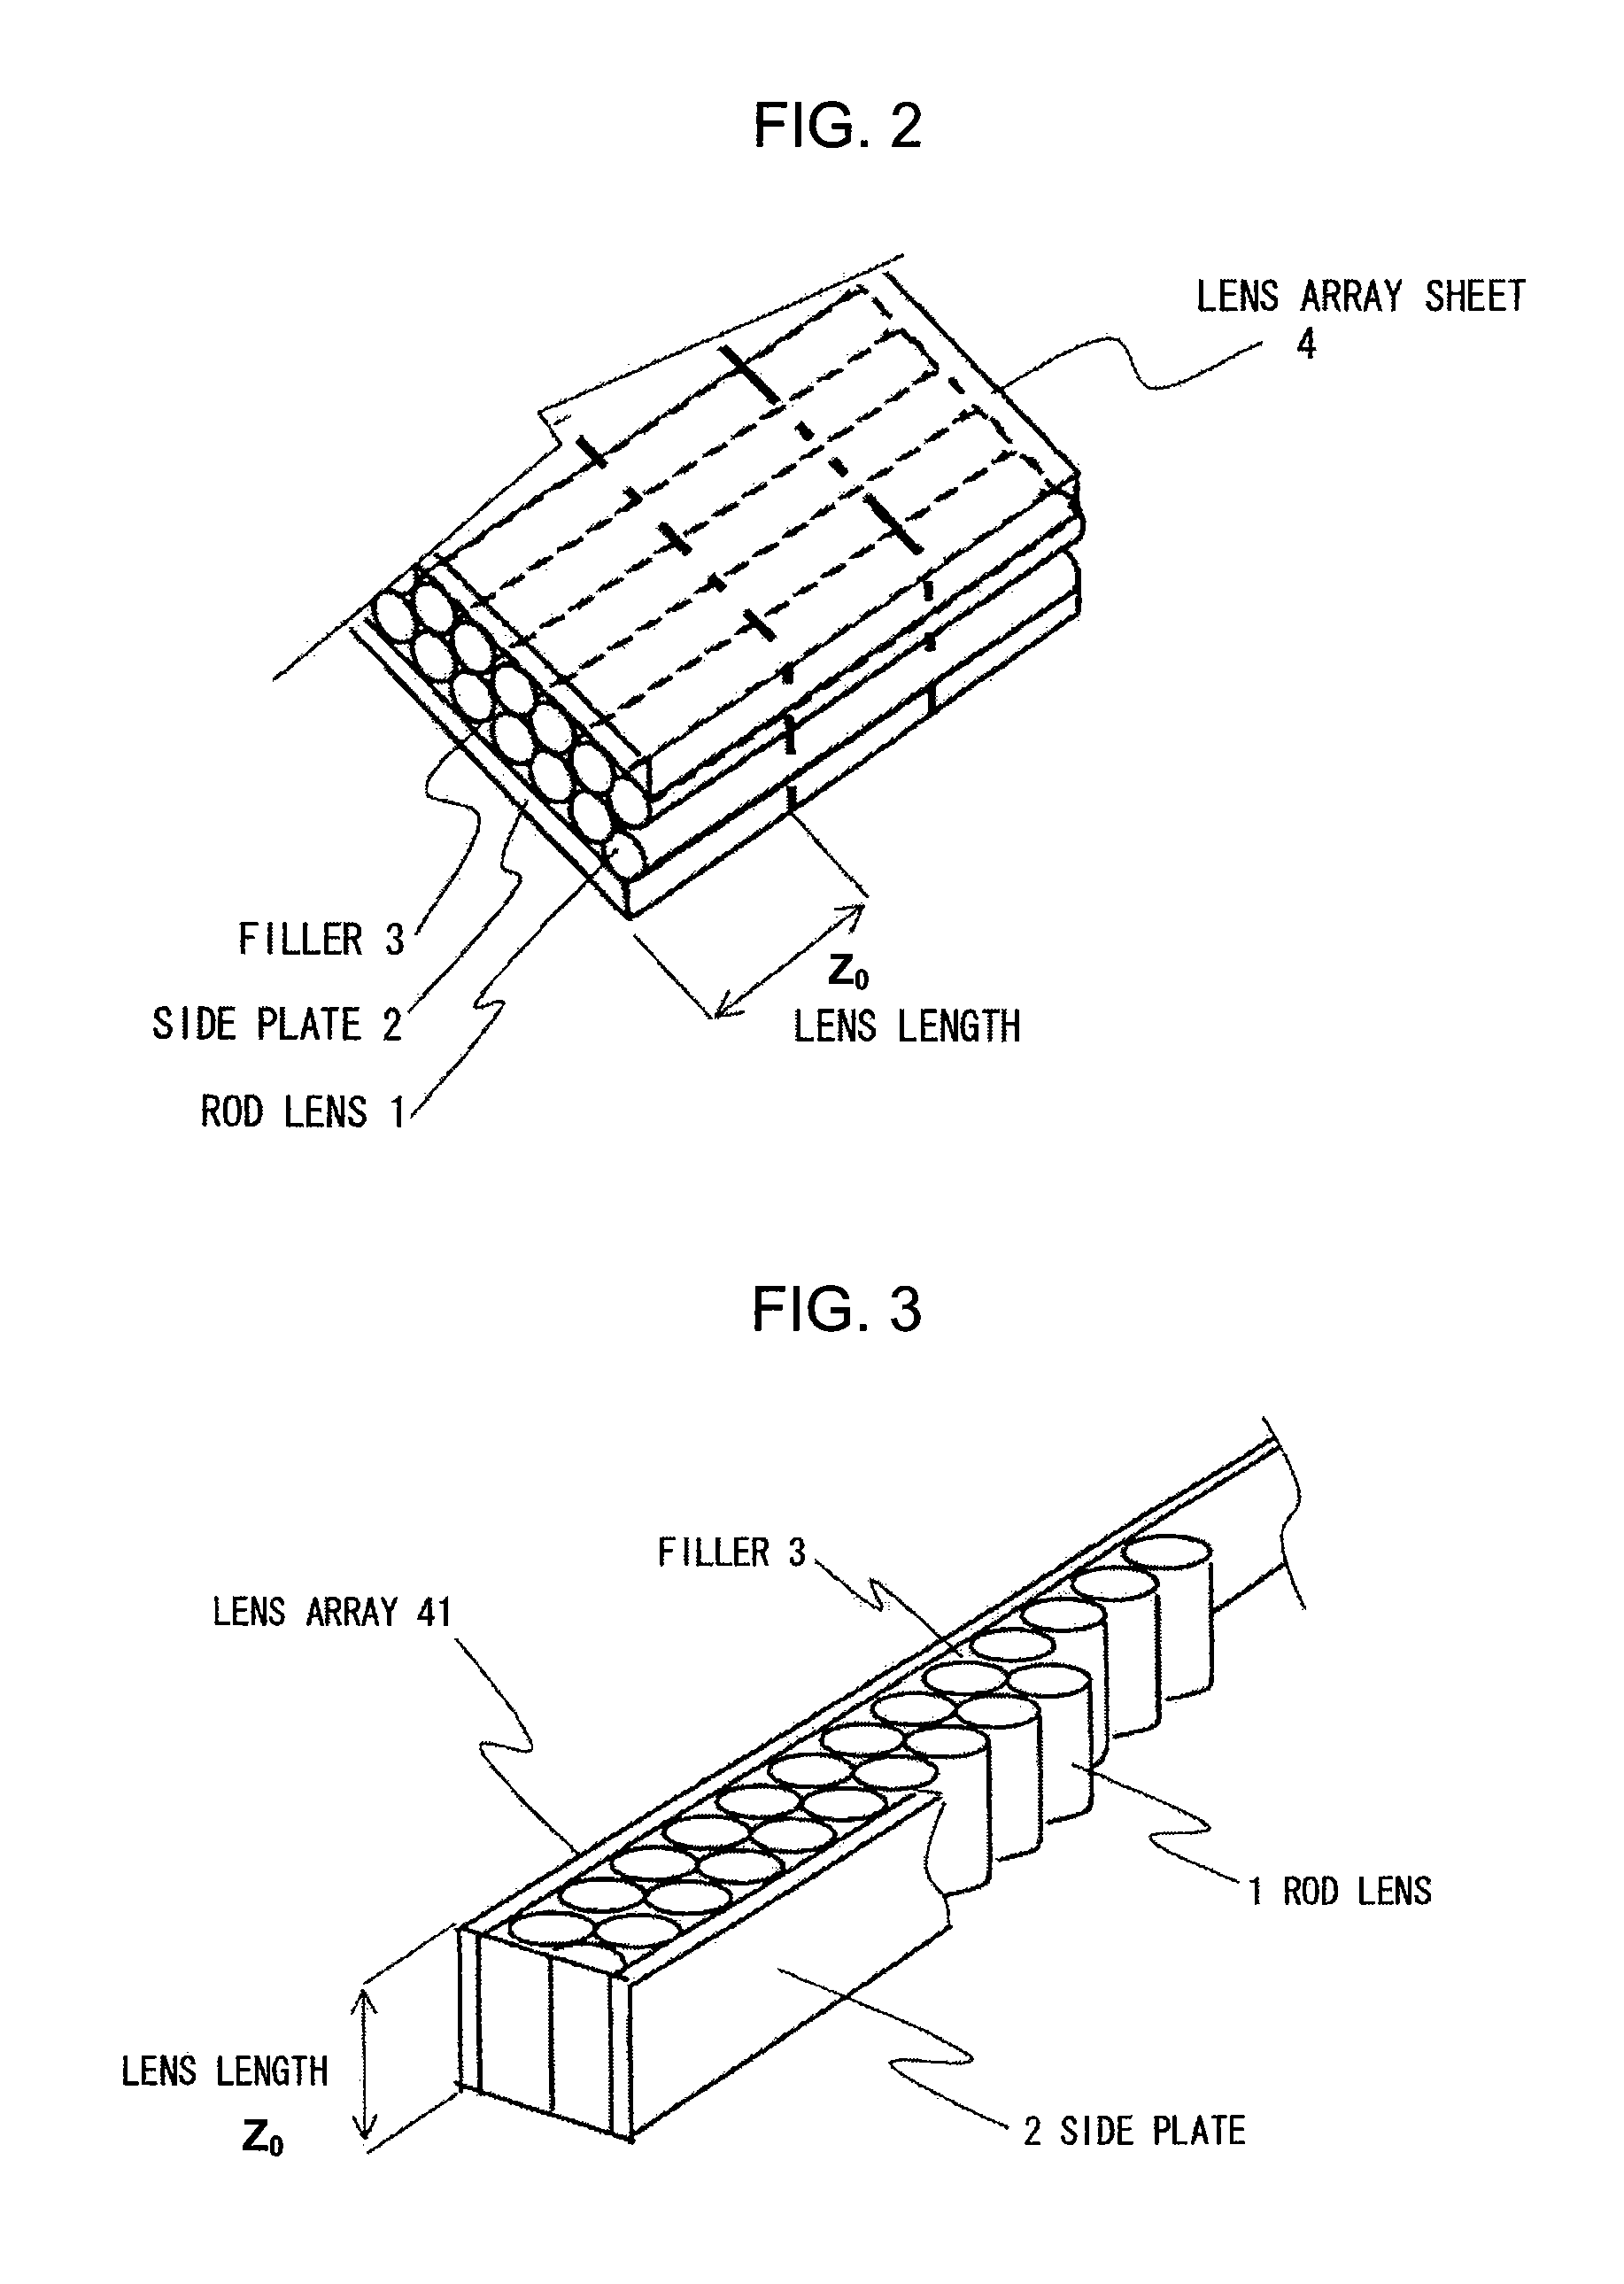 Lens array, exposure device, and image forming apparatus